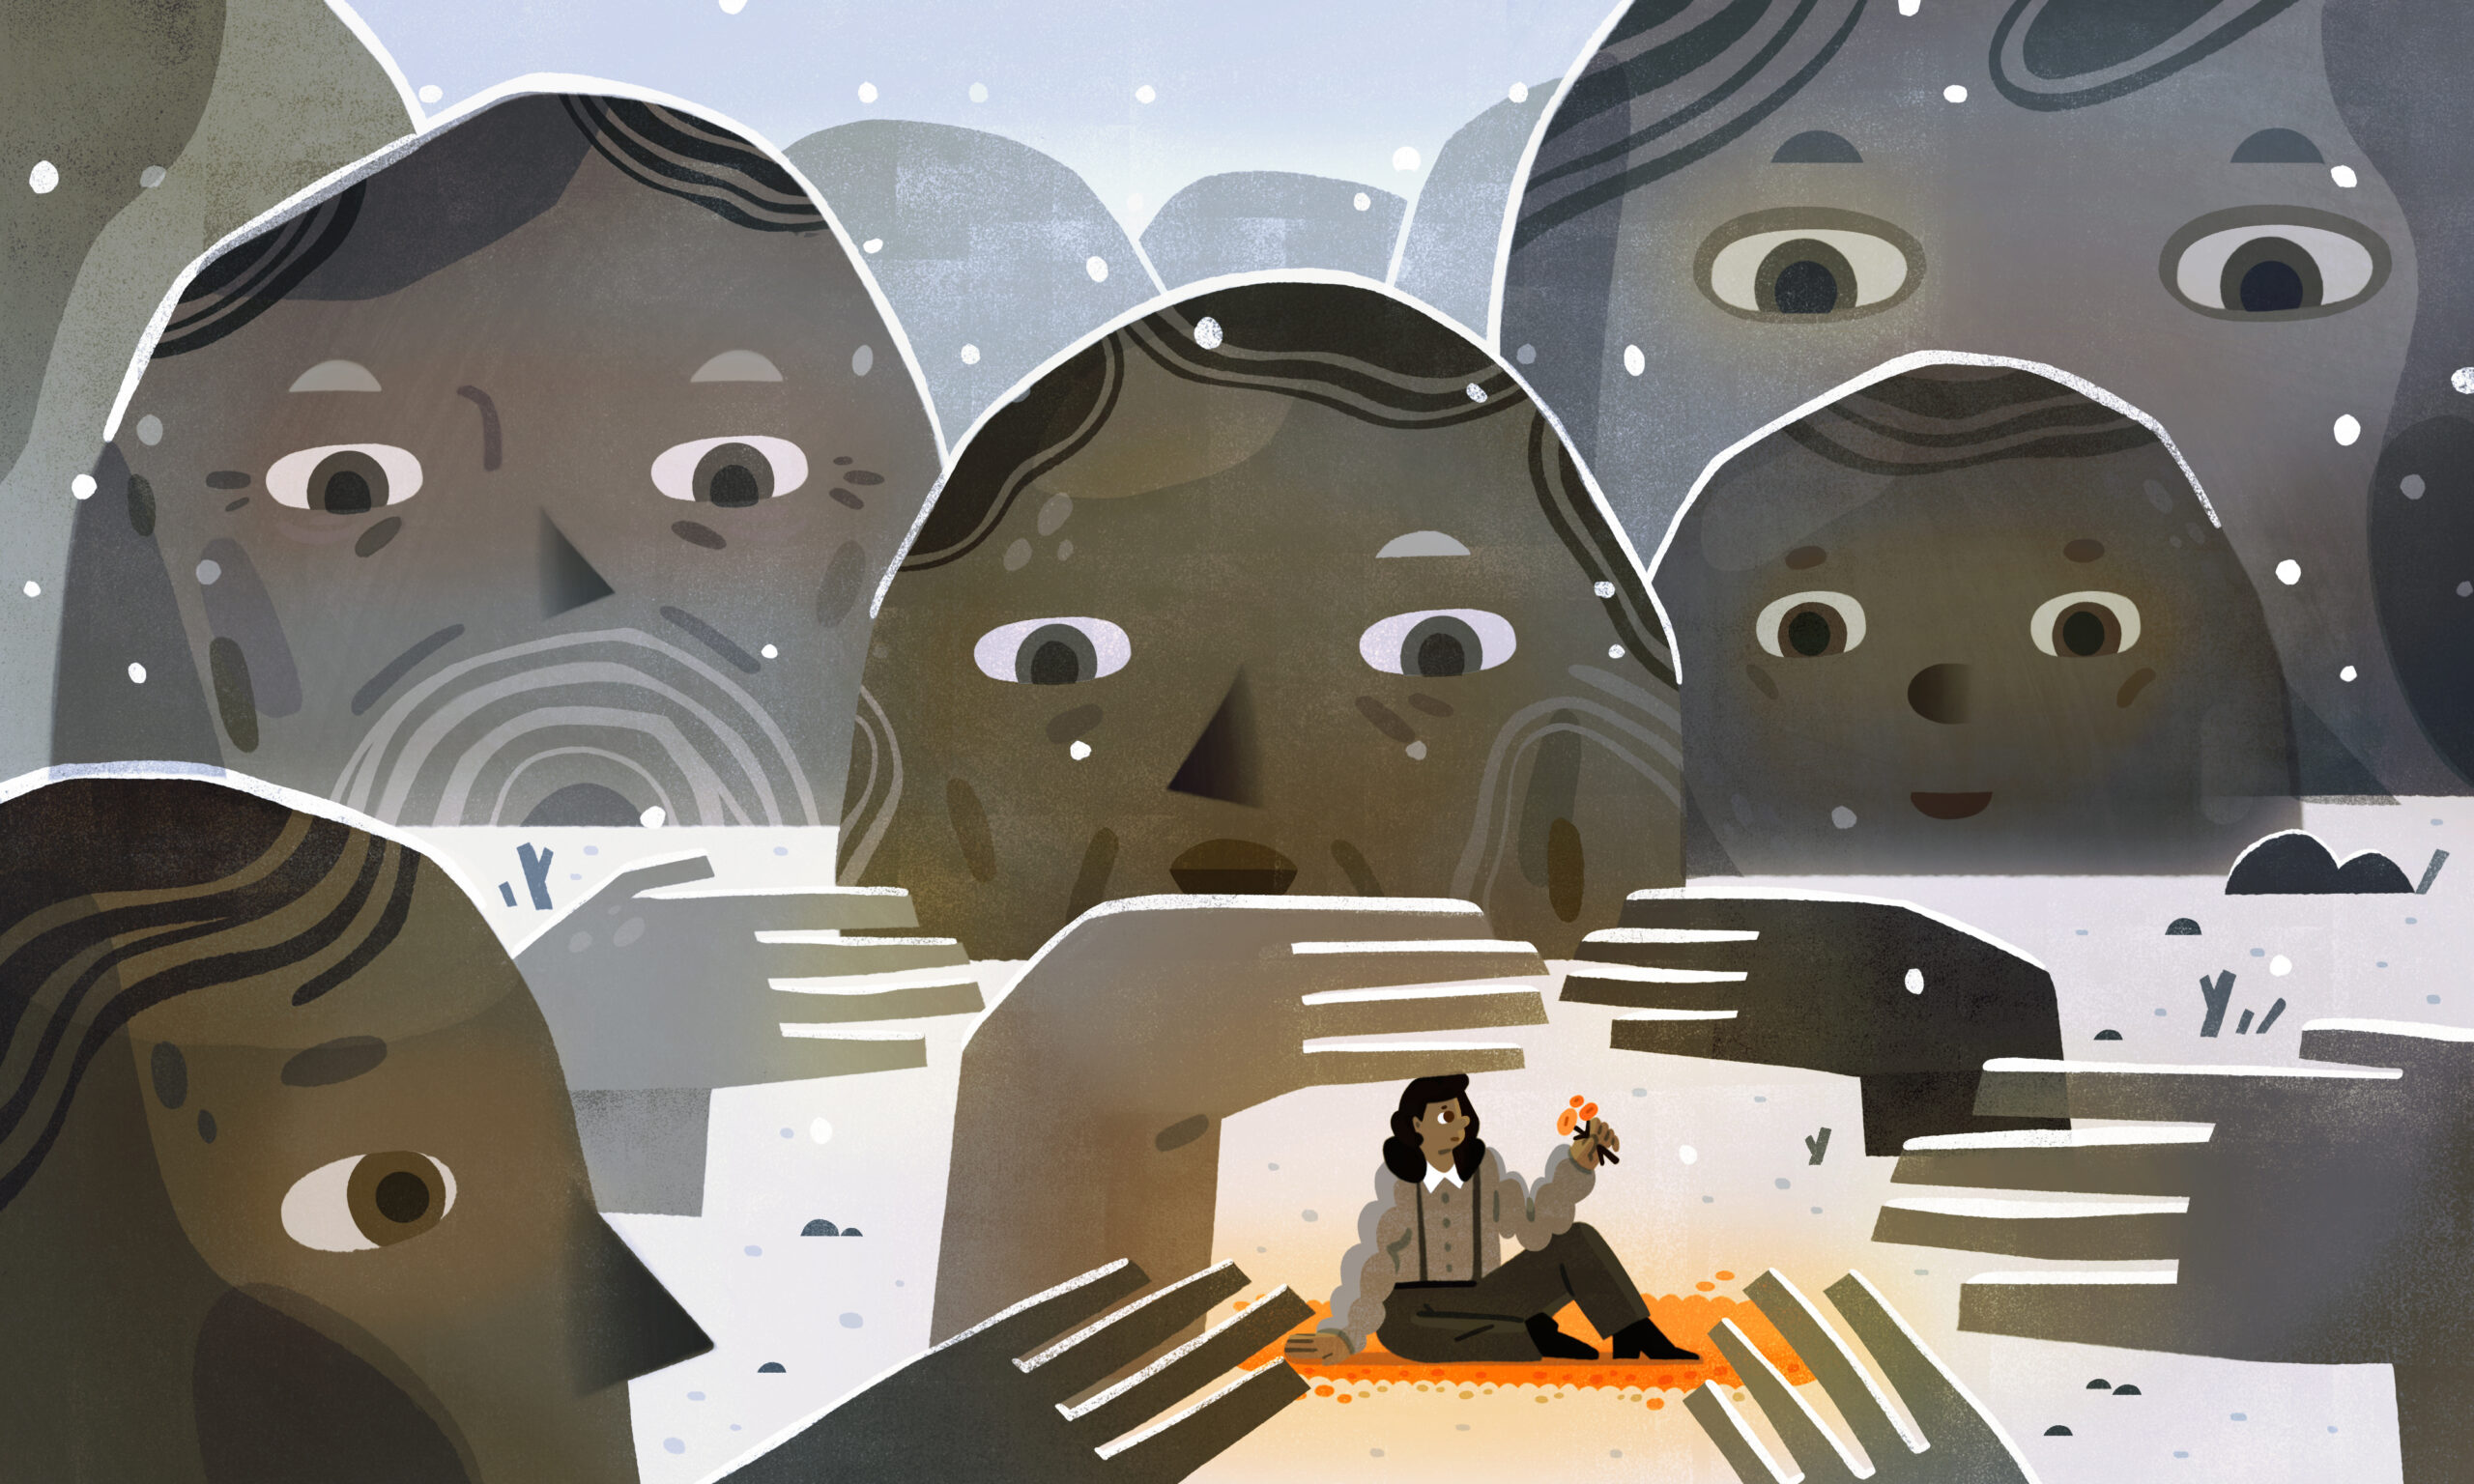 The illustration depicts a family of rocks providing shelter with hands for the girl in the snowy weather. The girl is seated on a blossoming orange flower field picking flowers. 